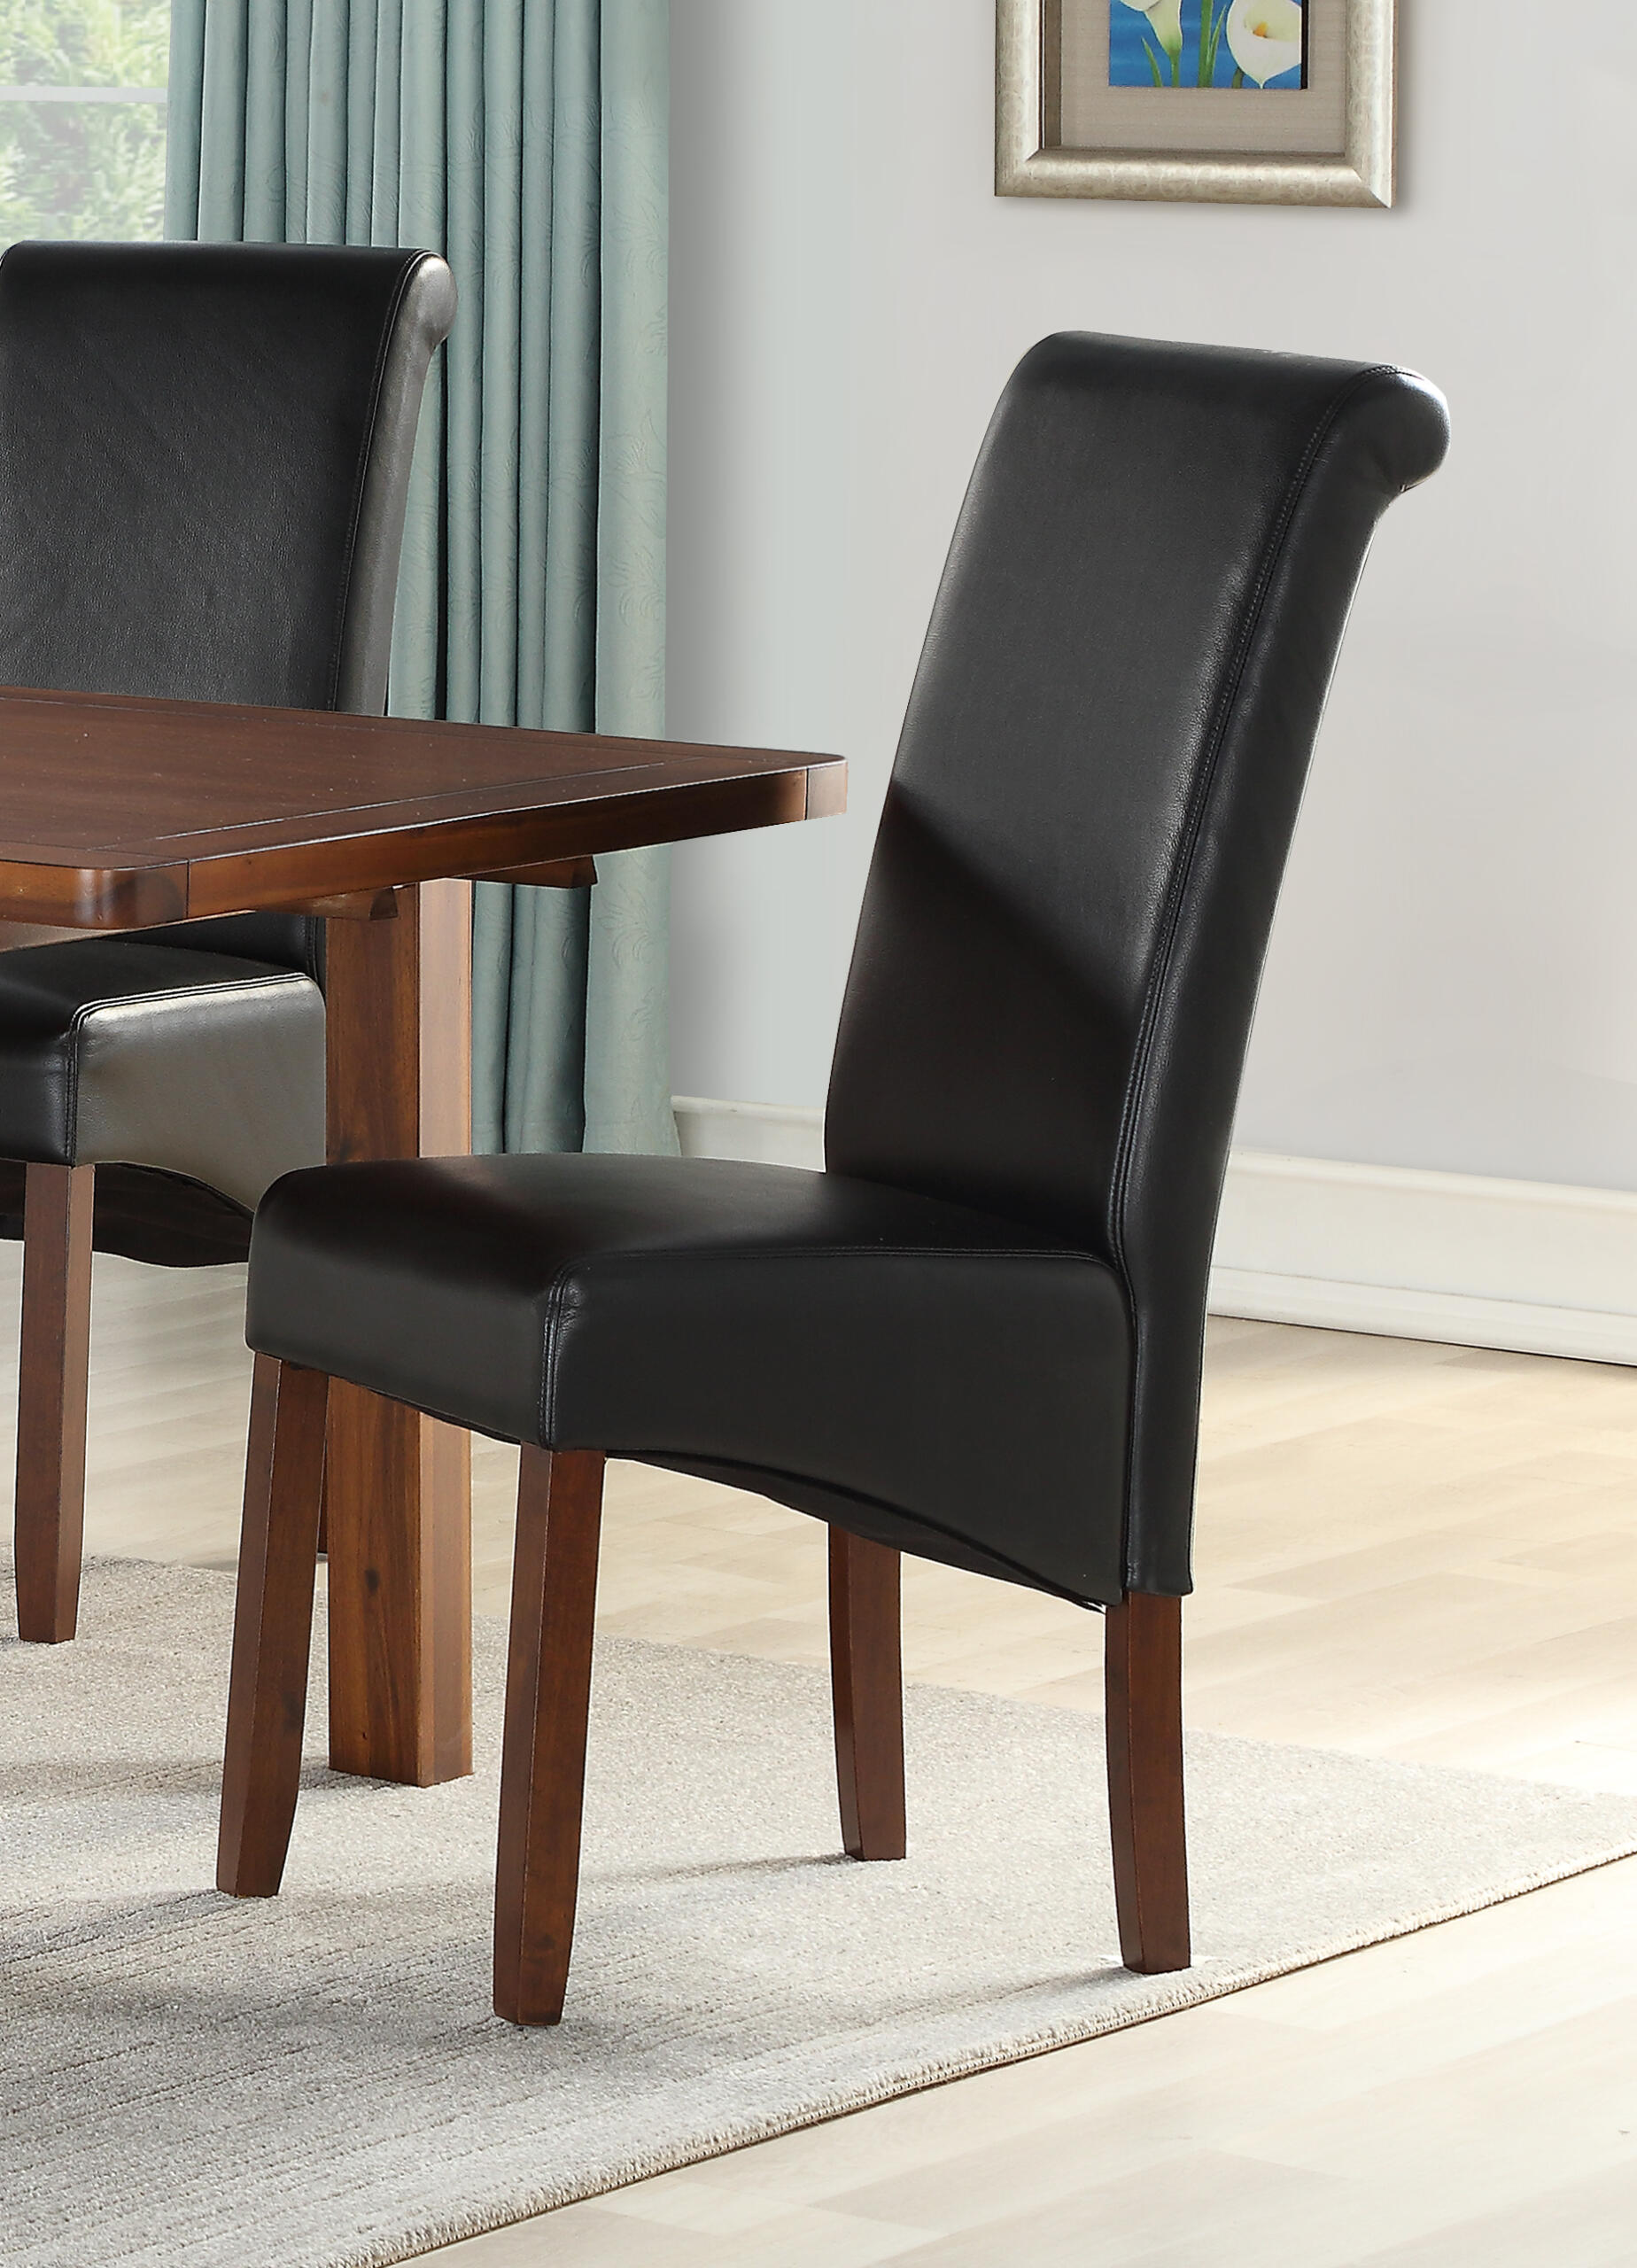 Andorra Acacia Sophie Dining Chair in Black with Acacia Legs